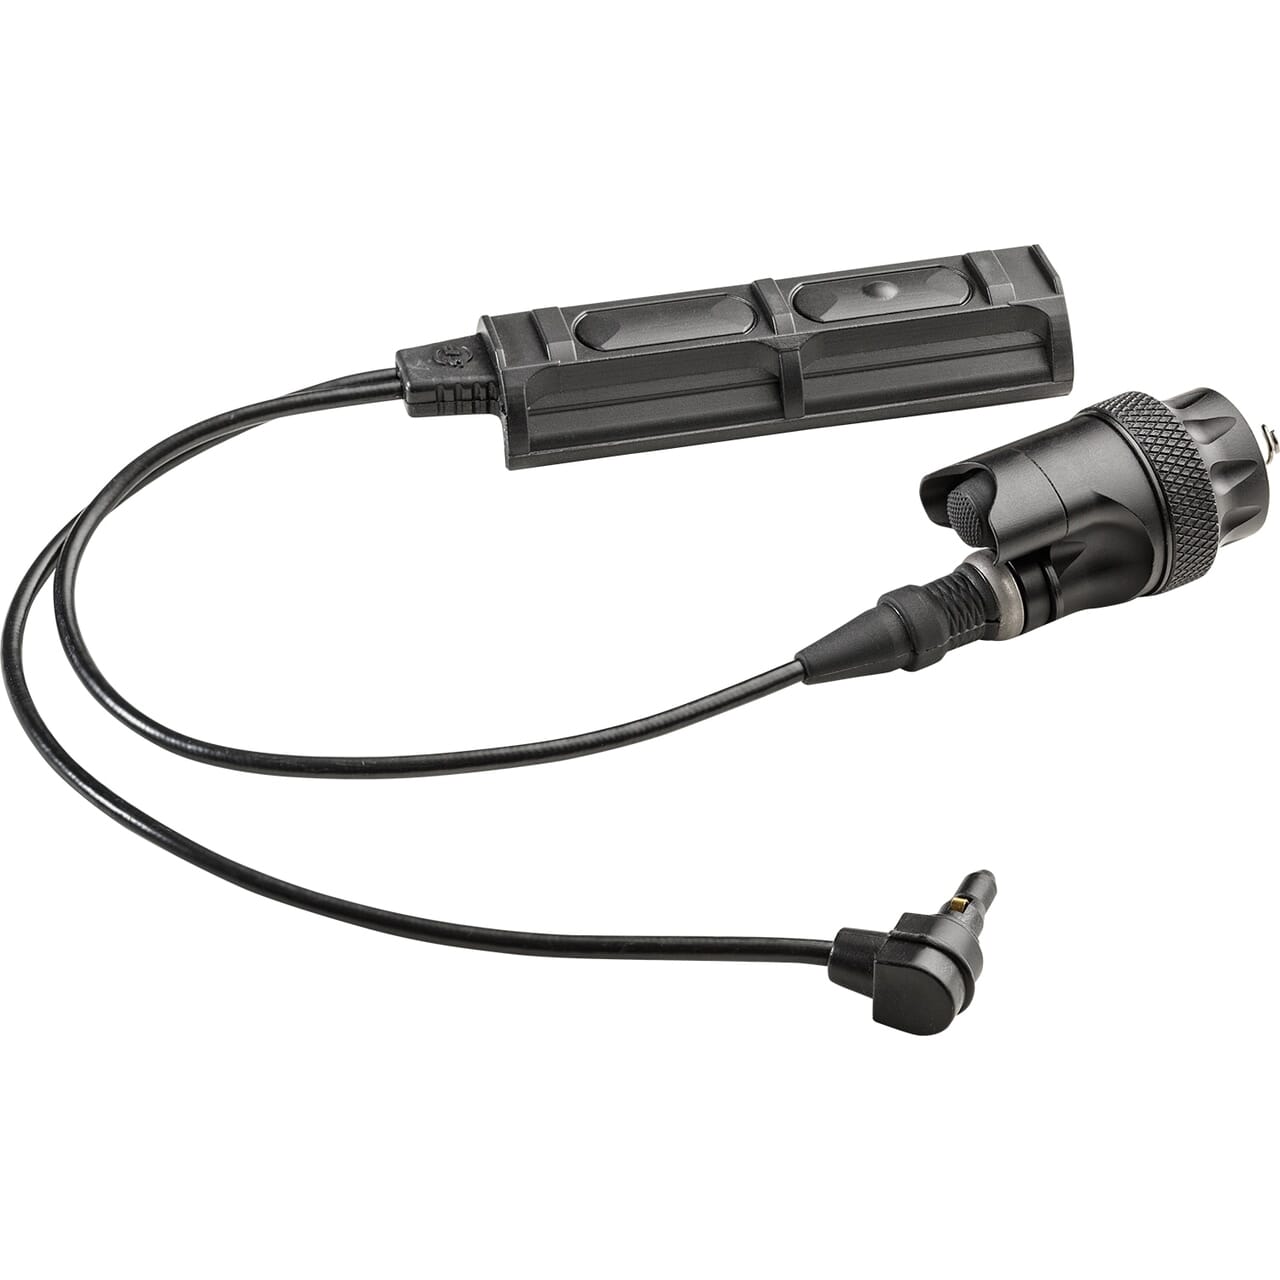 SureFire Scout Light/ATPIAL/DBAL Laser Waterproof Dual-Plug Rail Tape Switch Assembly w/ 7" Switch Cable DS-SR07-D-IT